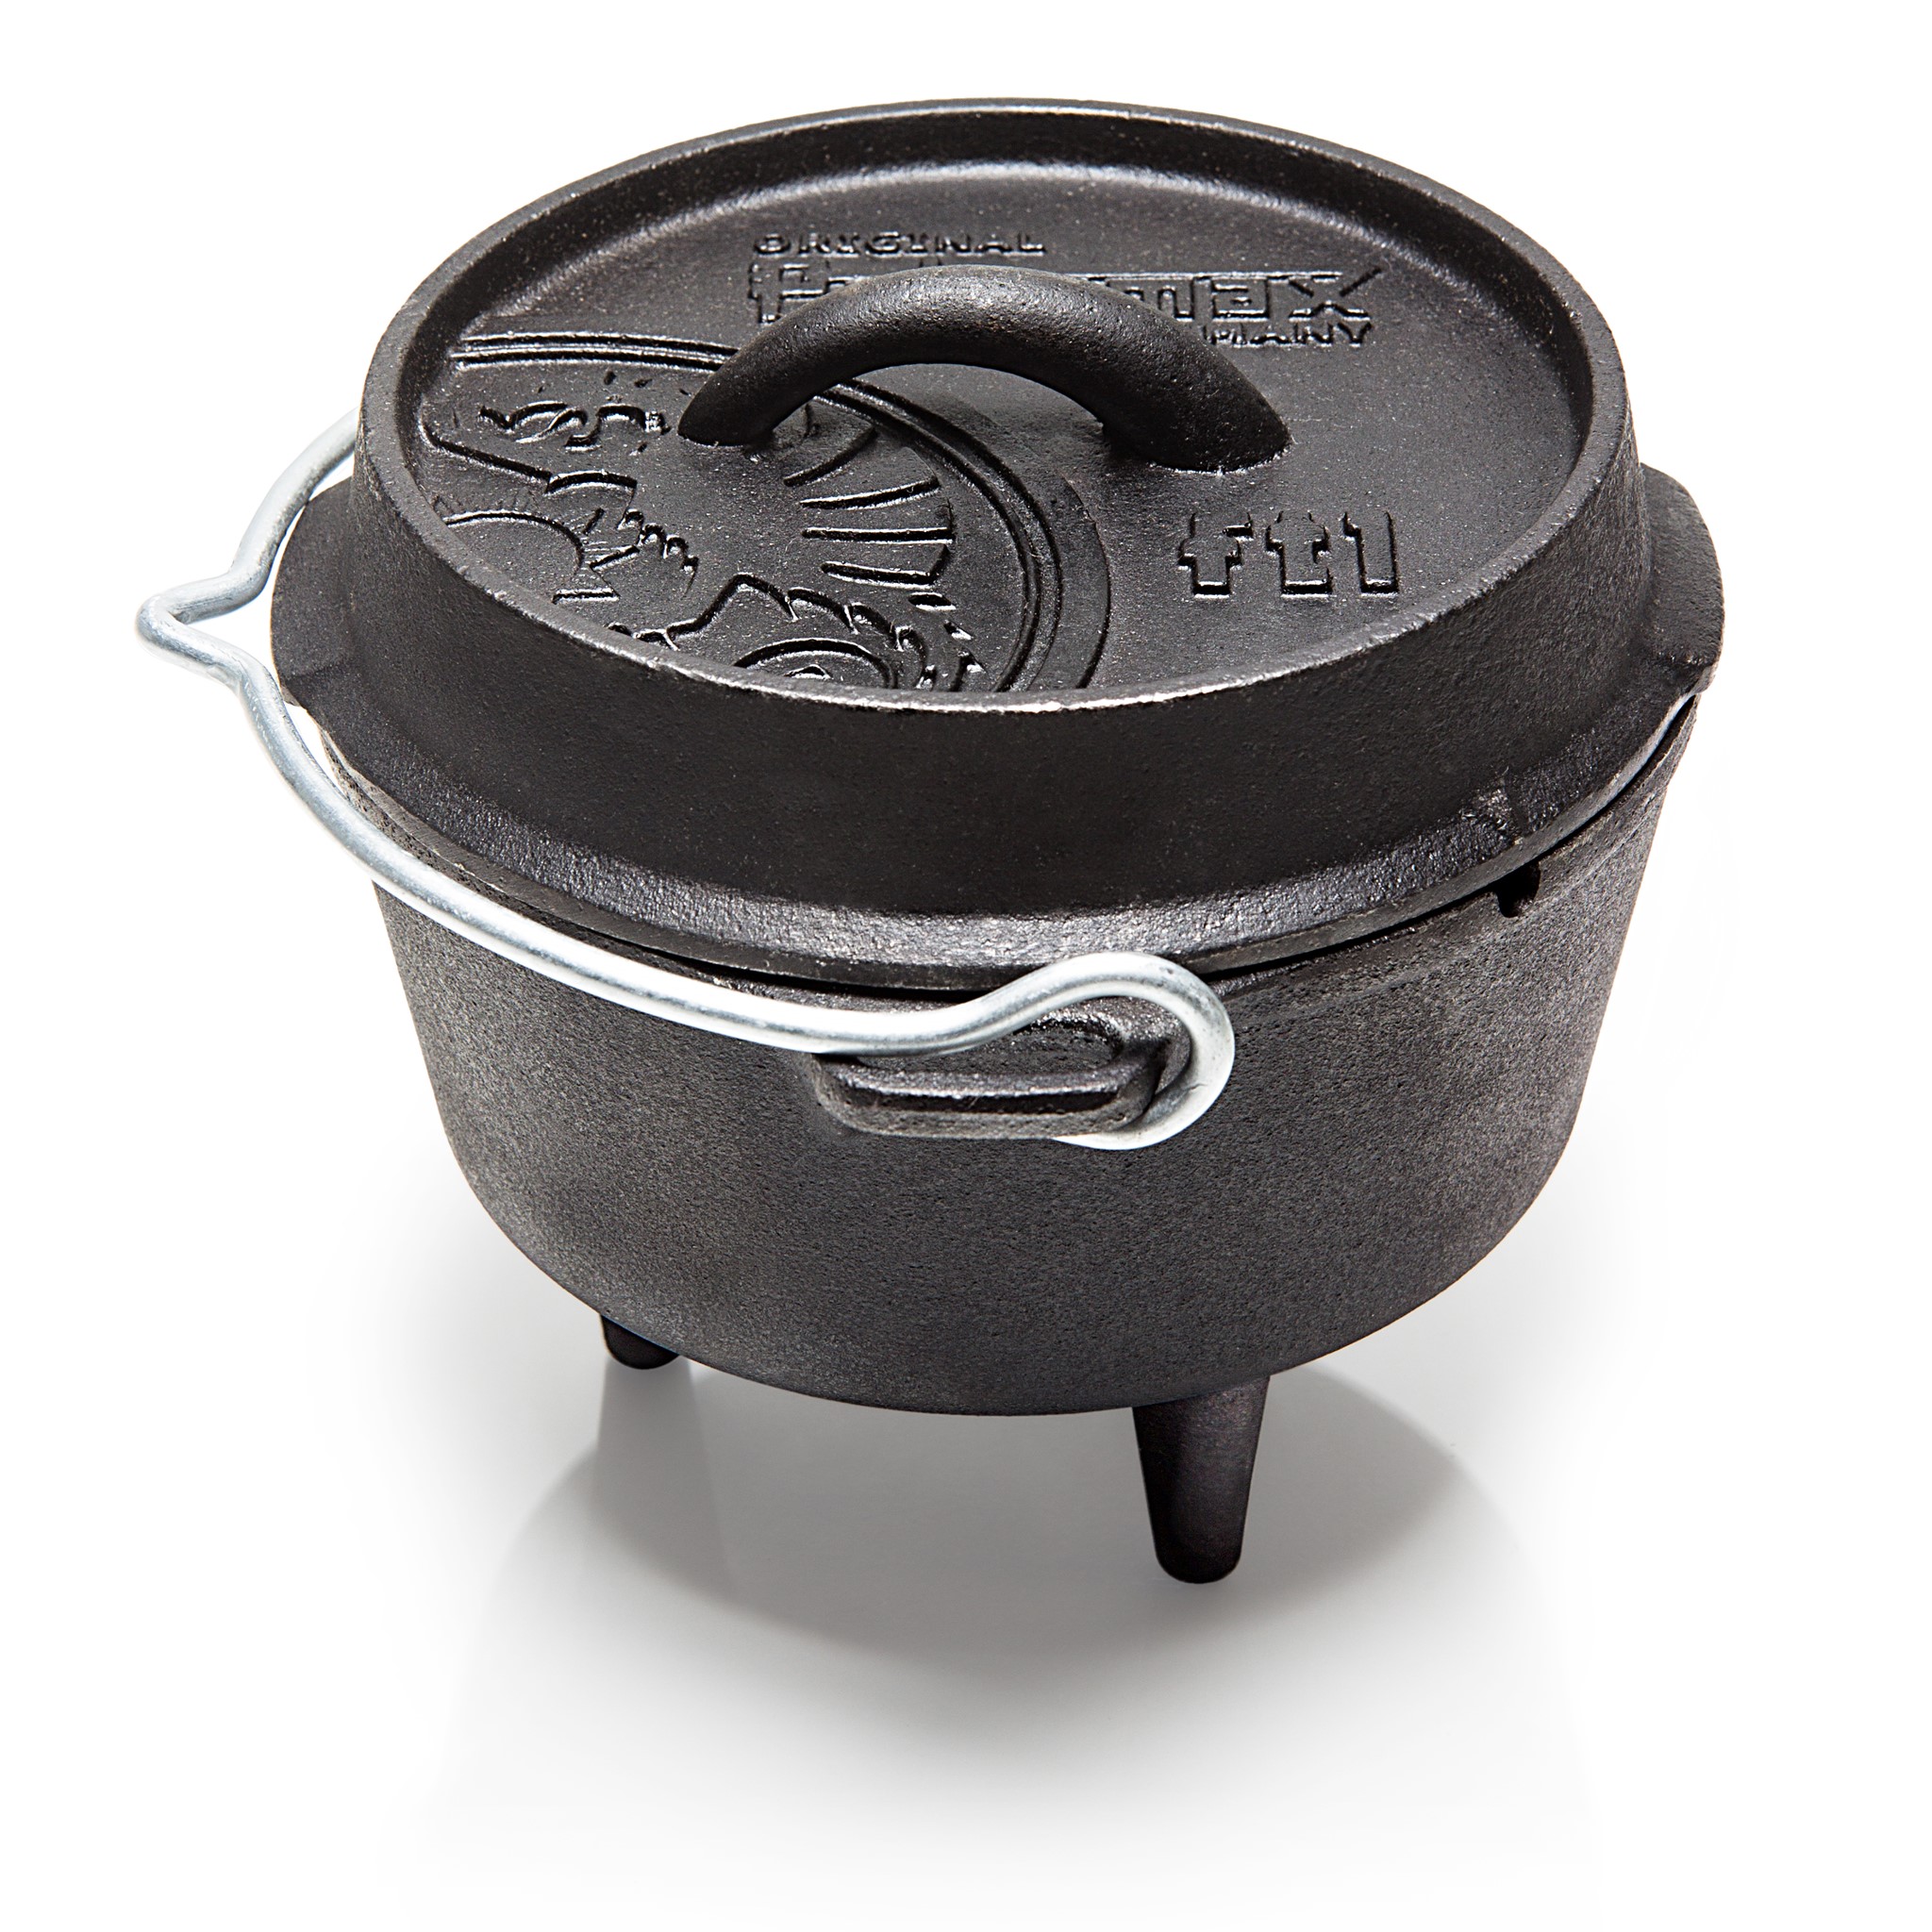 Picture of Petromax - Dutch Oven FT1 Fire Pot 0.93 Liter (with Feet)